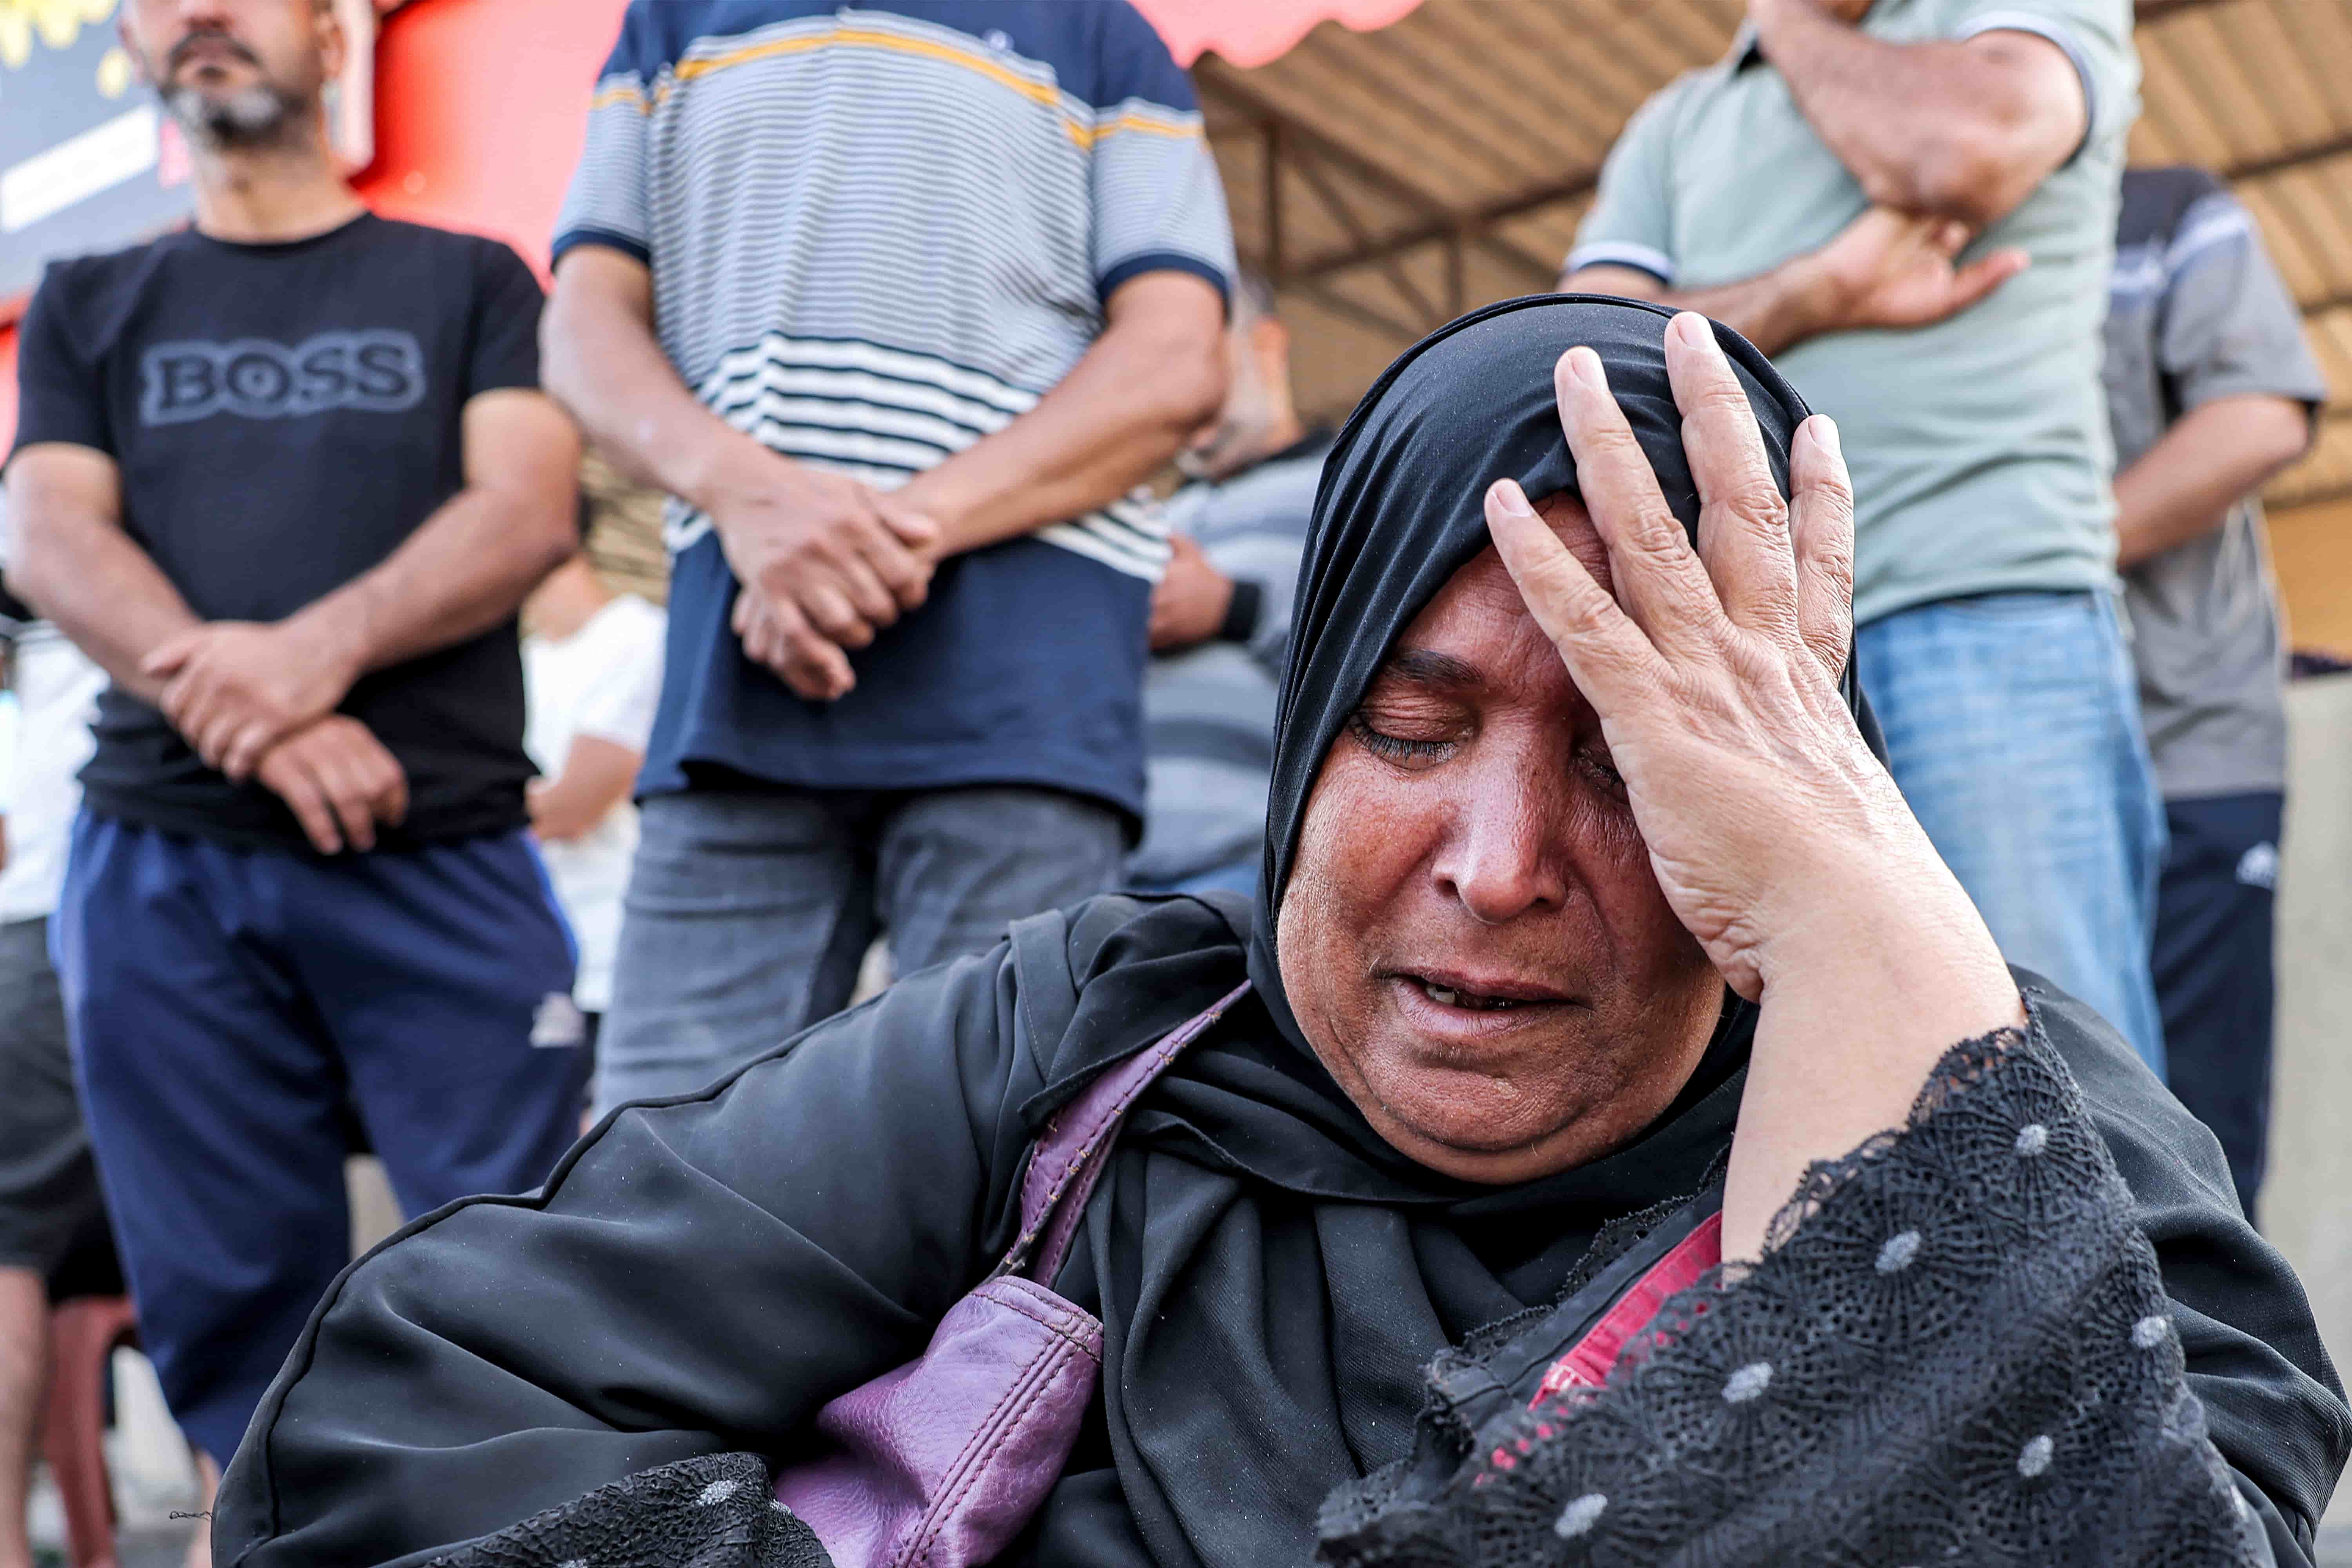 Sabah Said, a Palestinian-Egyptian dual national, cries as she waits at the crossing. [Mohammed Abed/AFP]